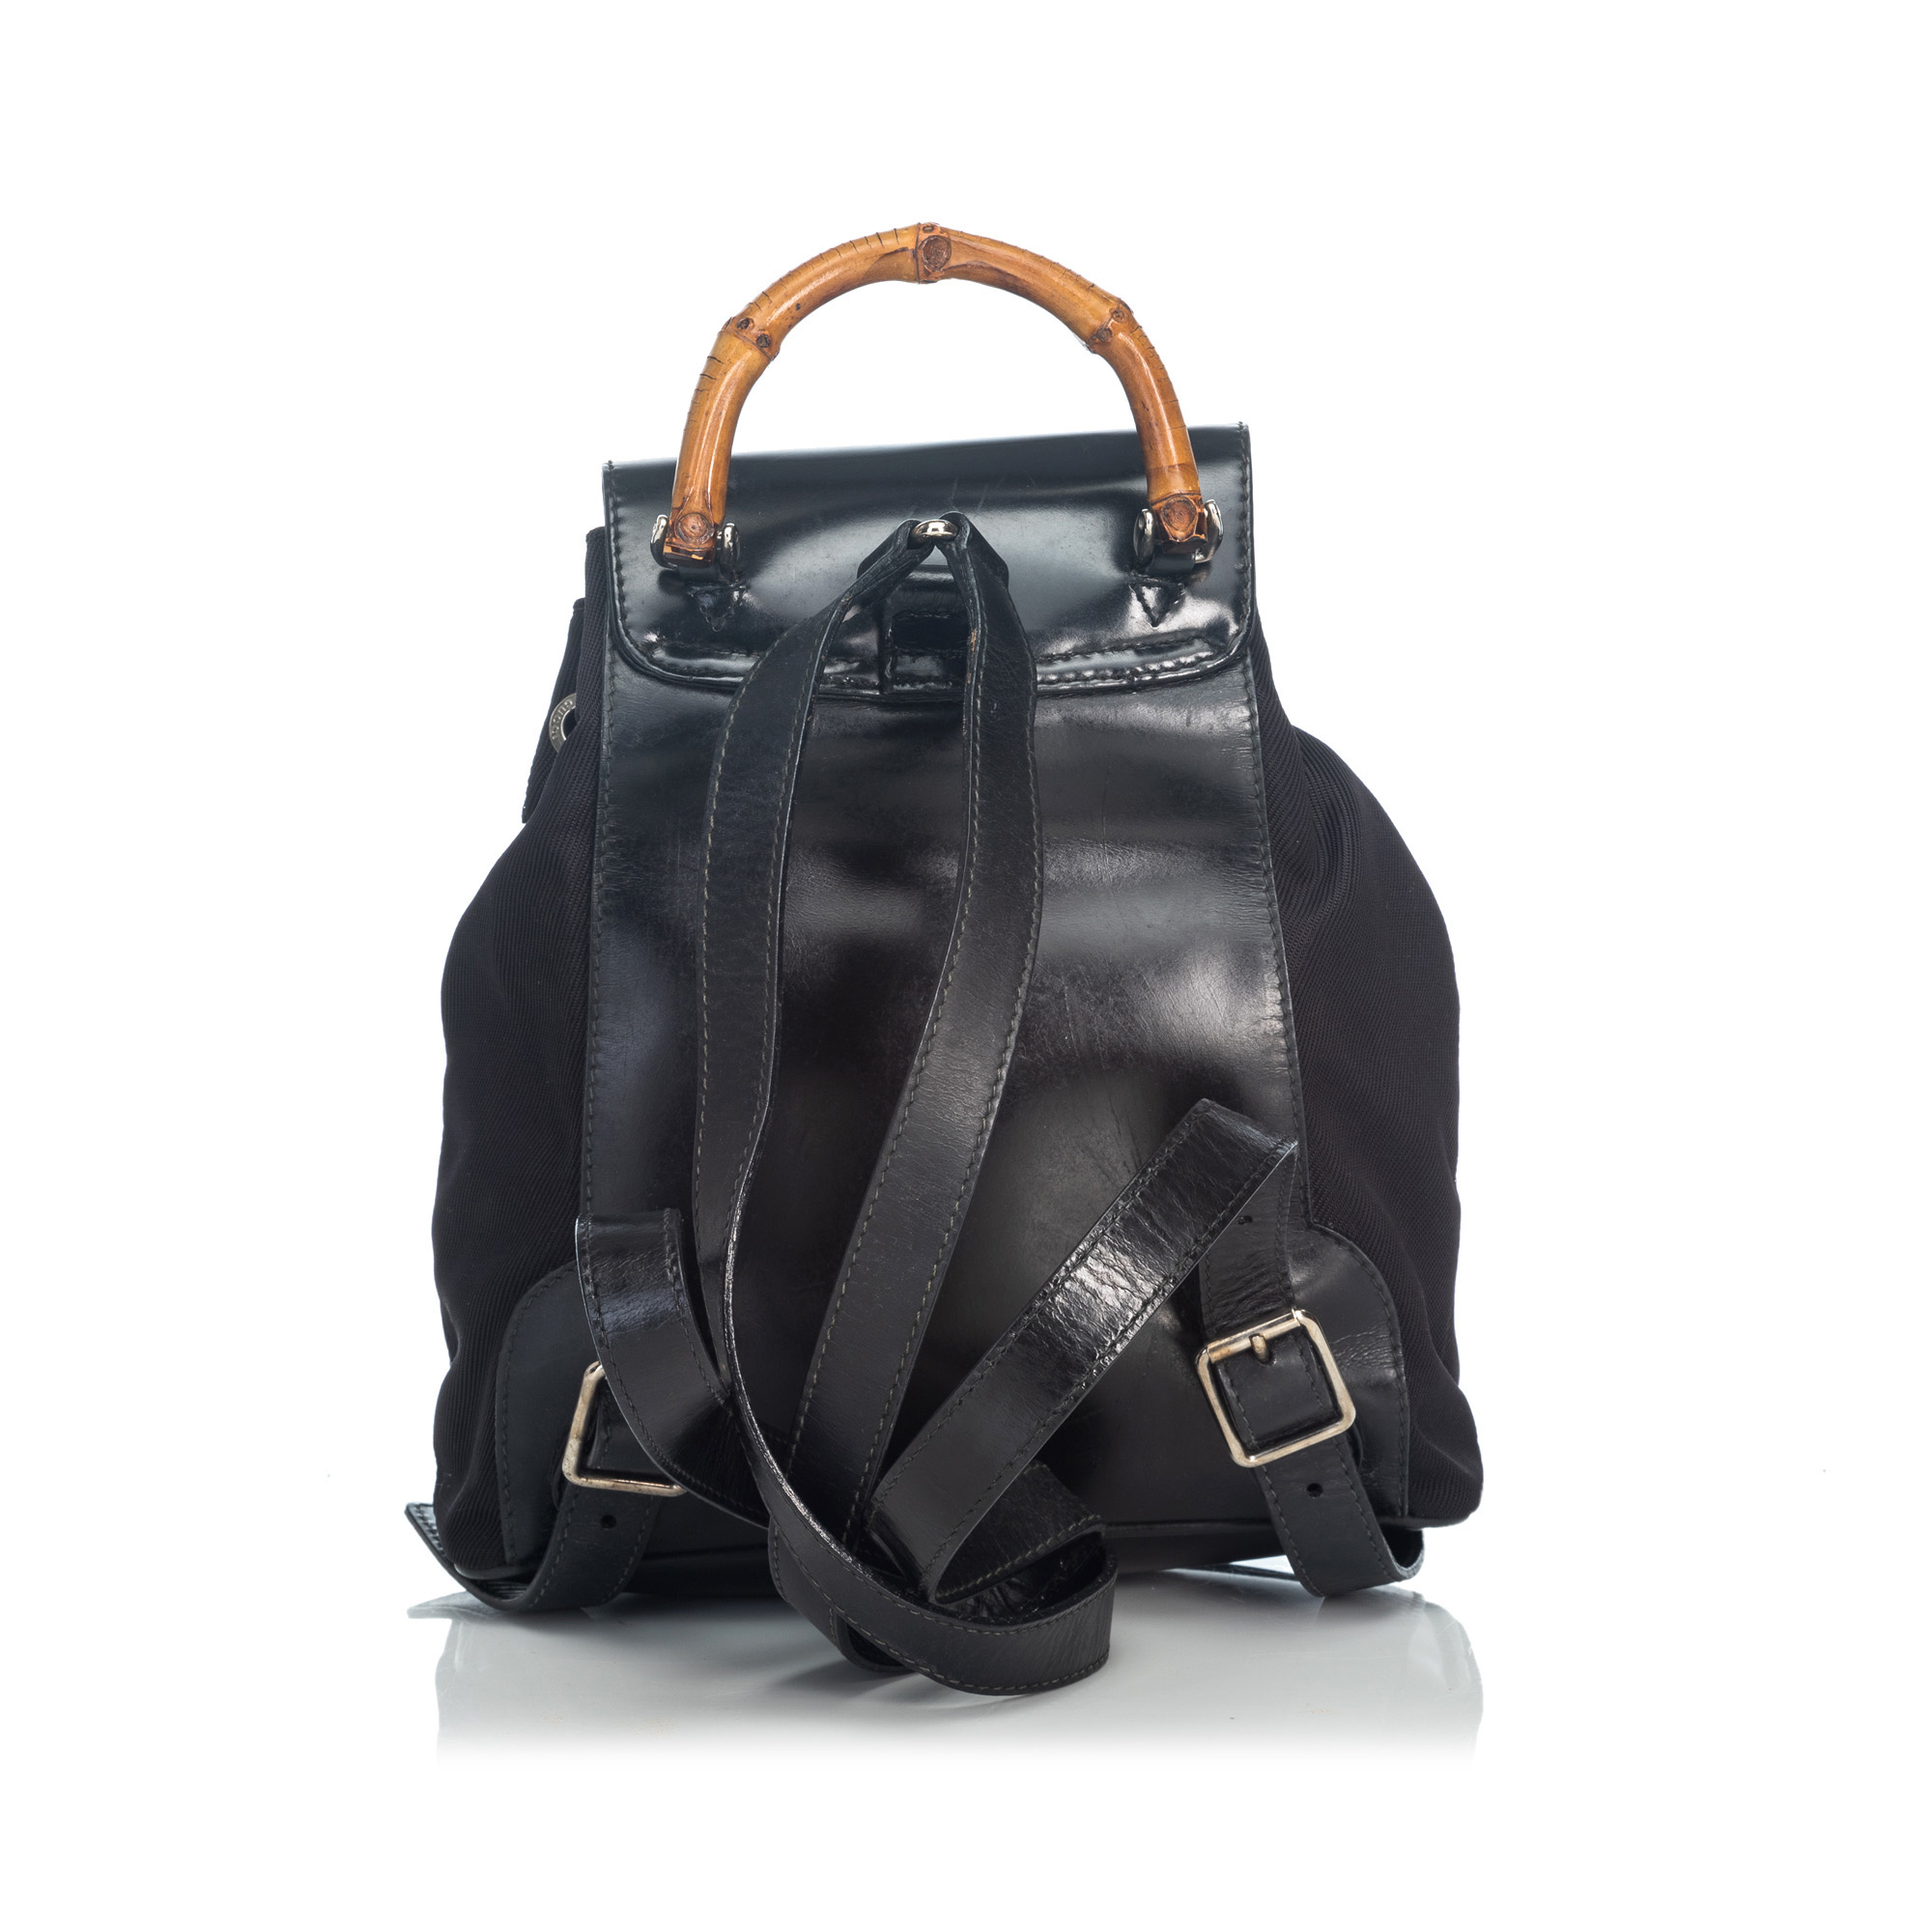 Gucci Bamboo Nylon Drawstring Backpack, this backpack features a nylon body with leather trim, - Image 3 of 11